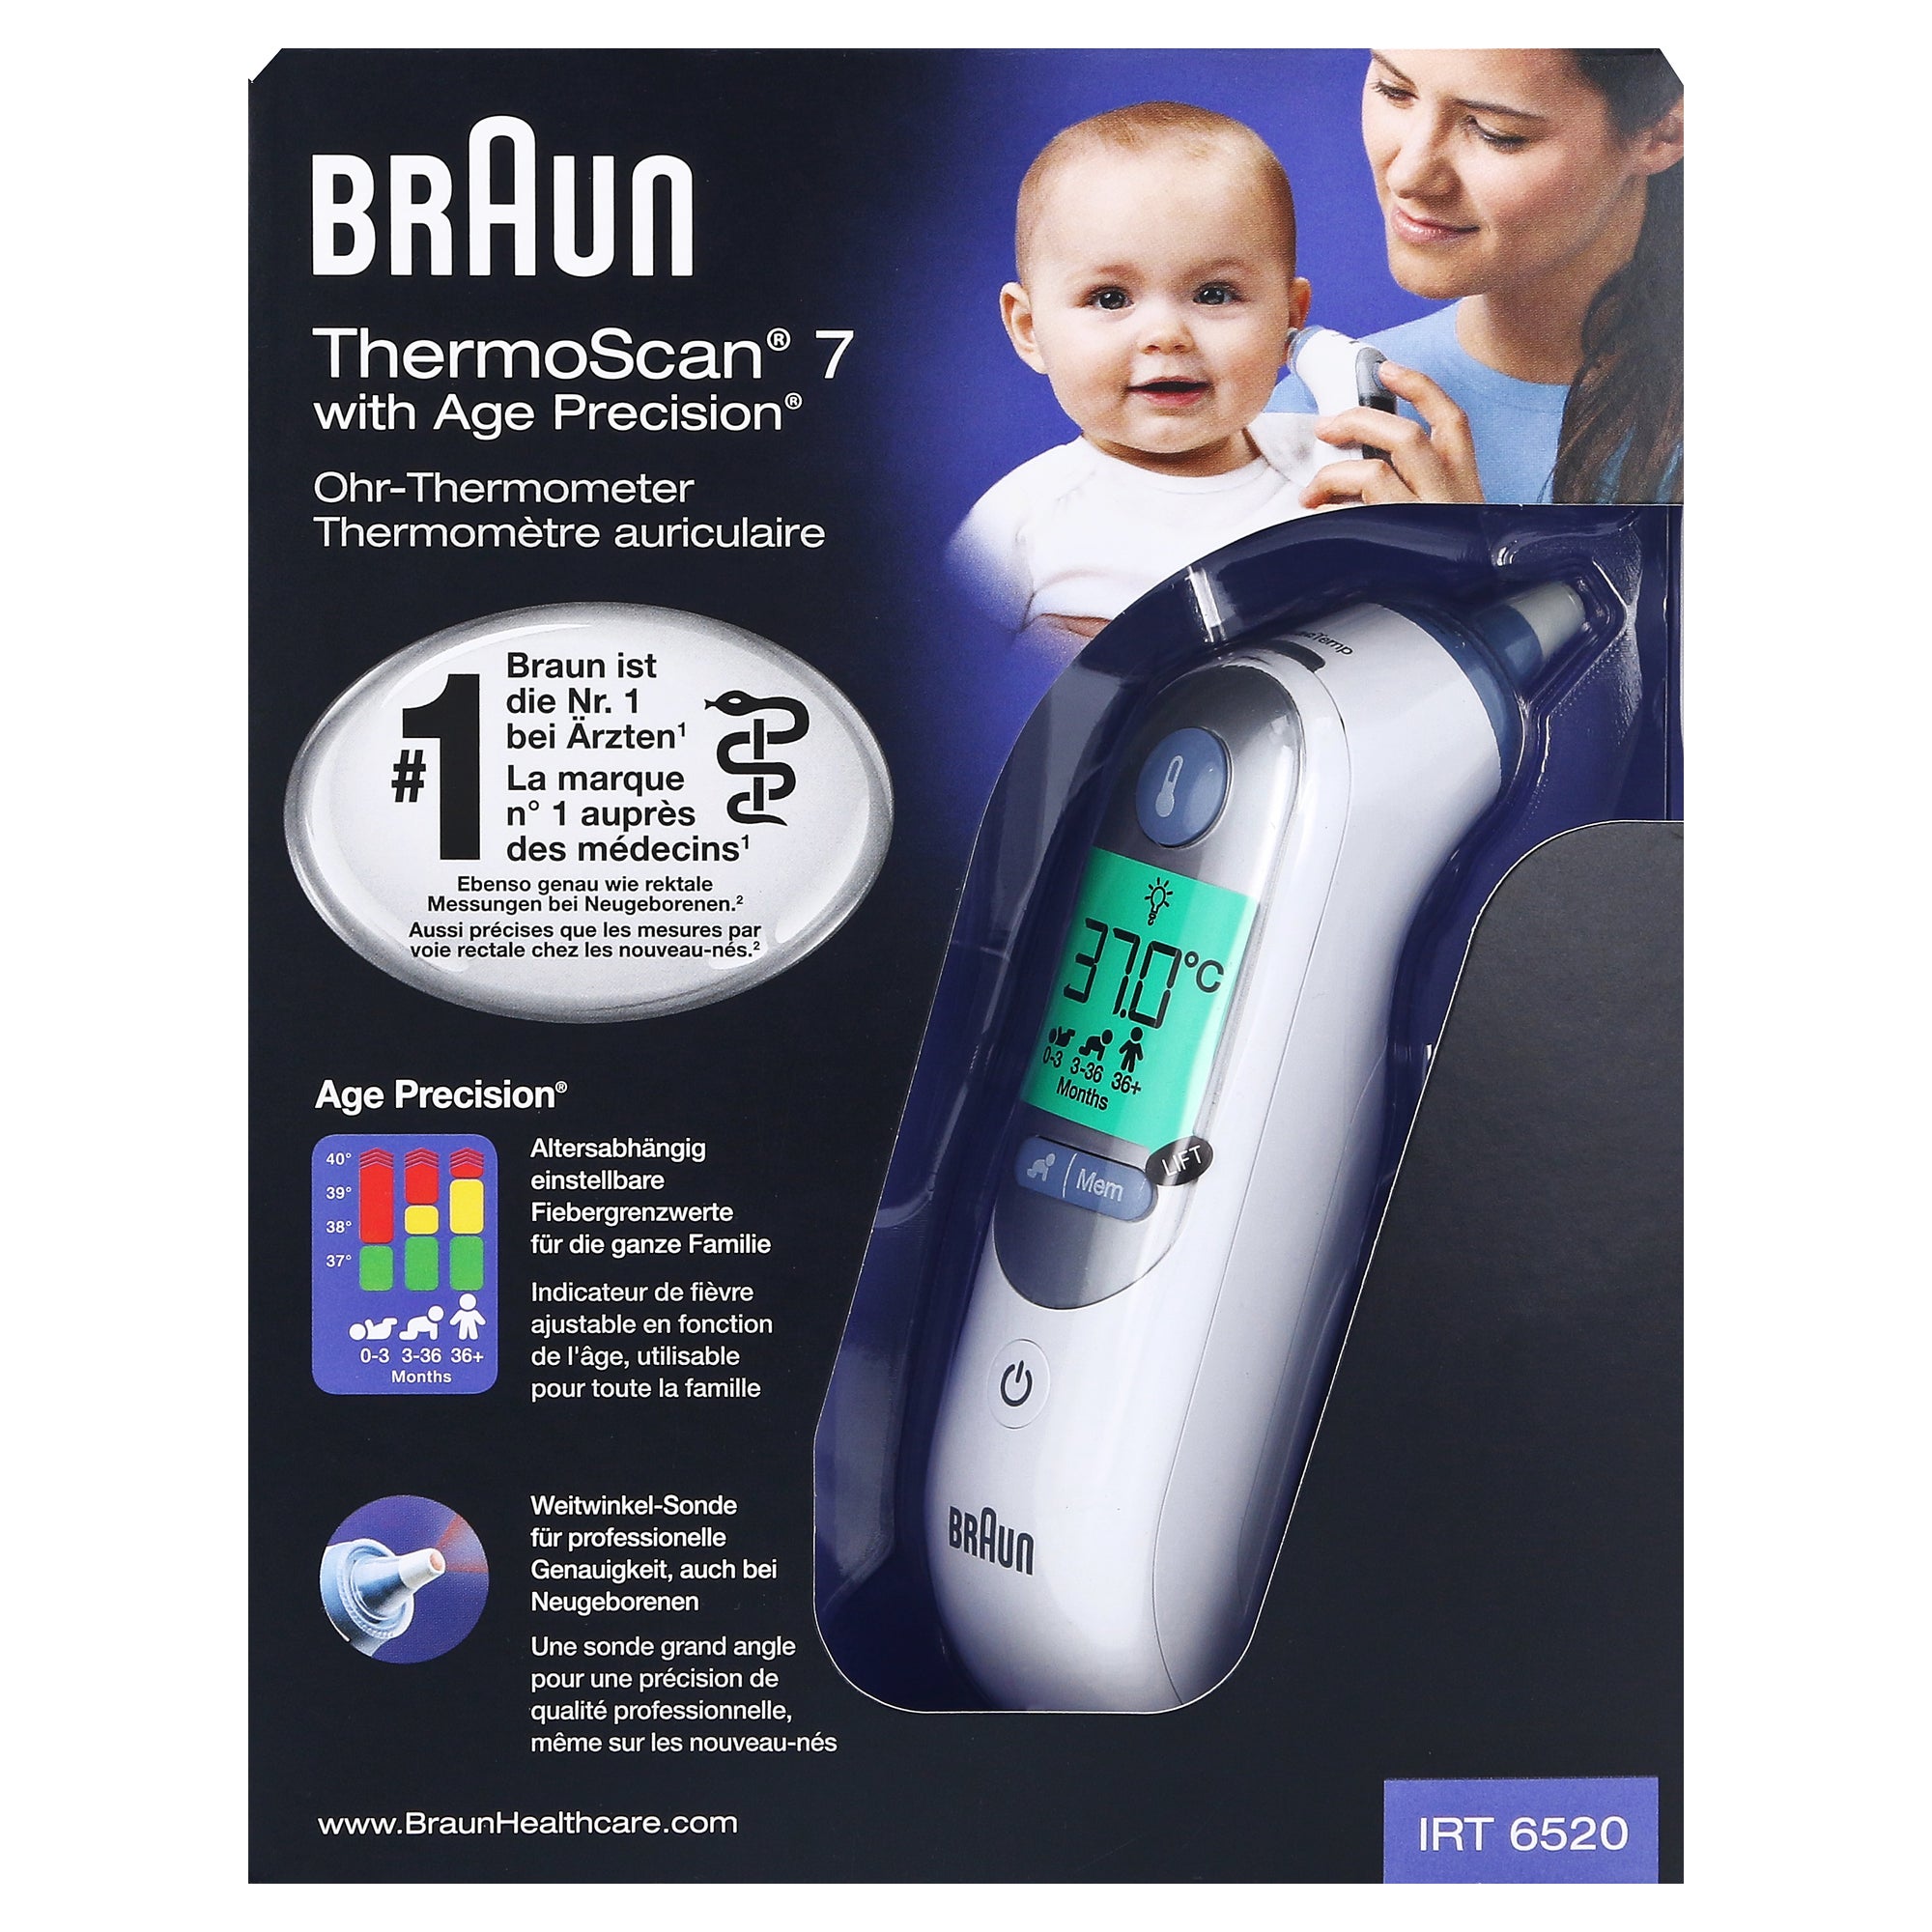 Thermoscan St. Irt6520 online Ohrthermometer, kaufen | 1 7 DocMorris